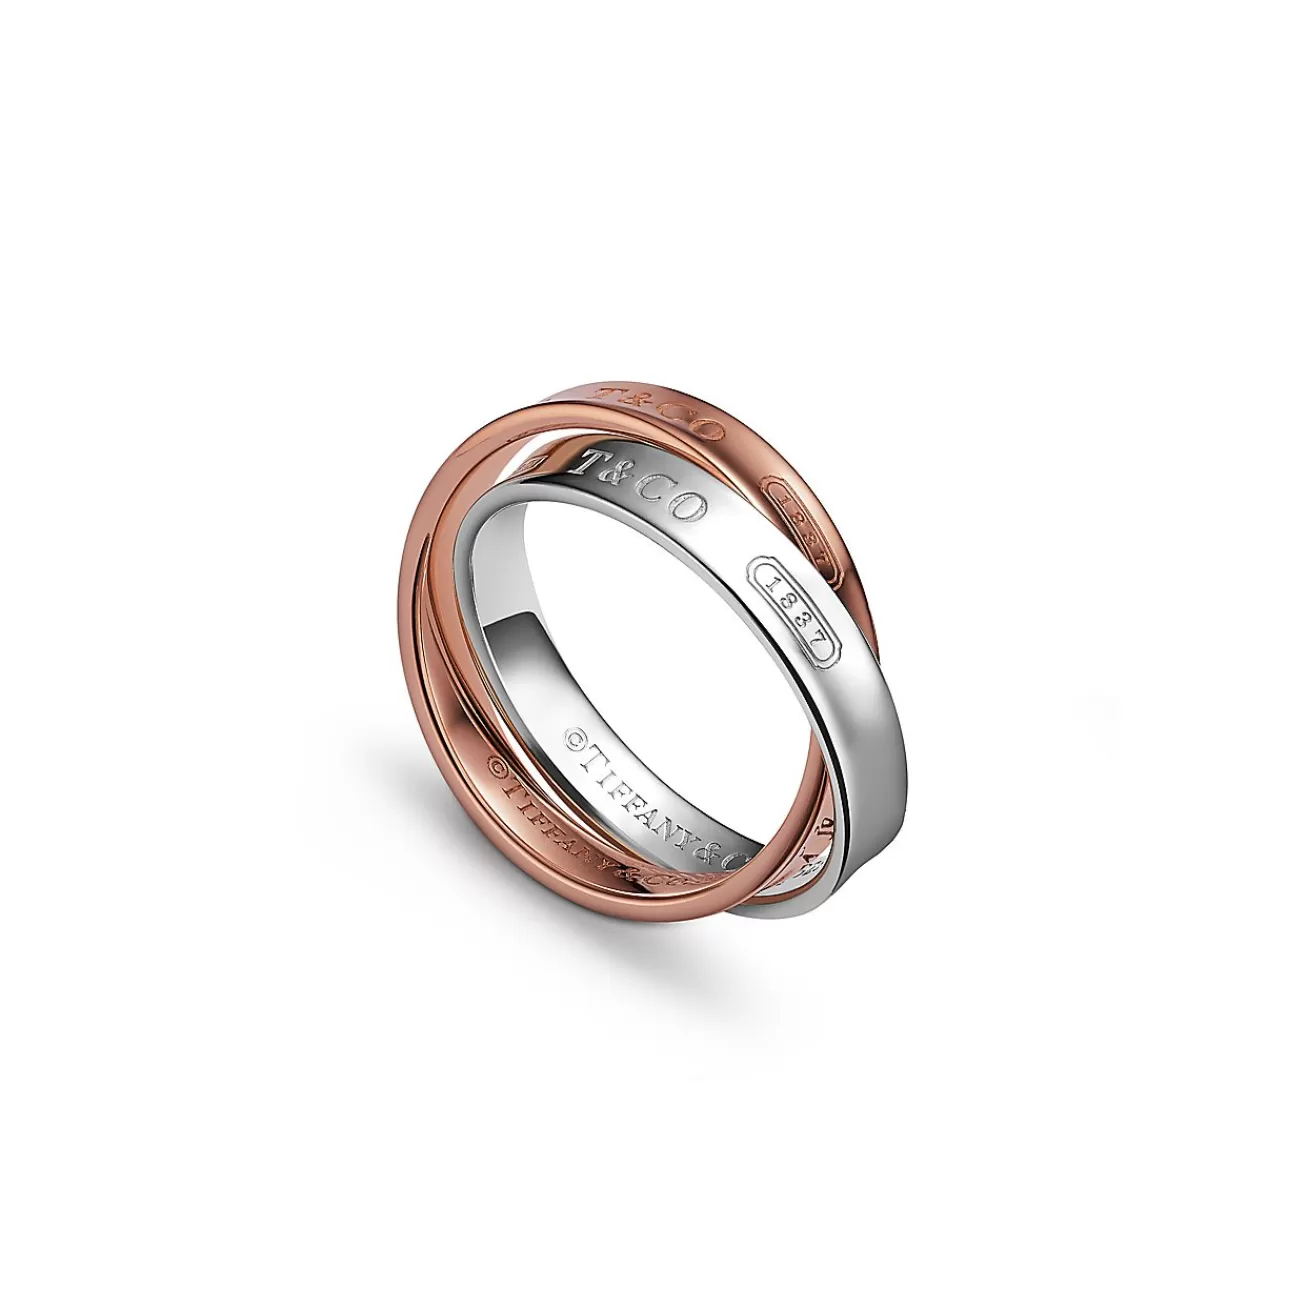 Tiffany & Co. Tiffany 1837® Interlocking Circles Ring in Rose Gold and Sterling Silver | ^ Rings | New Jewelry